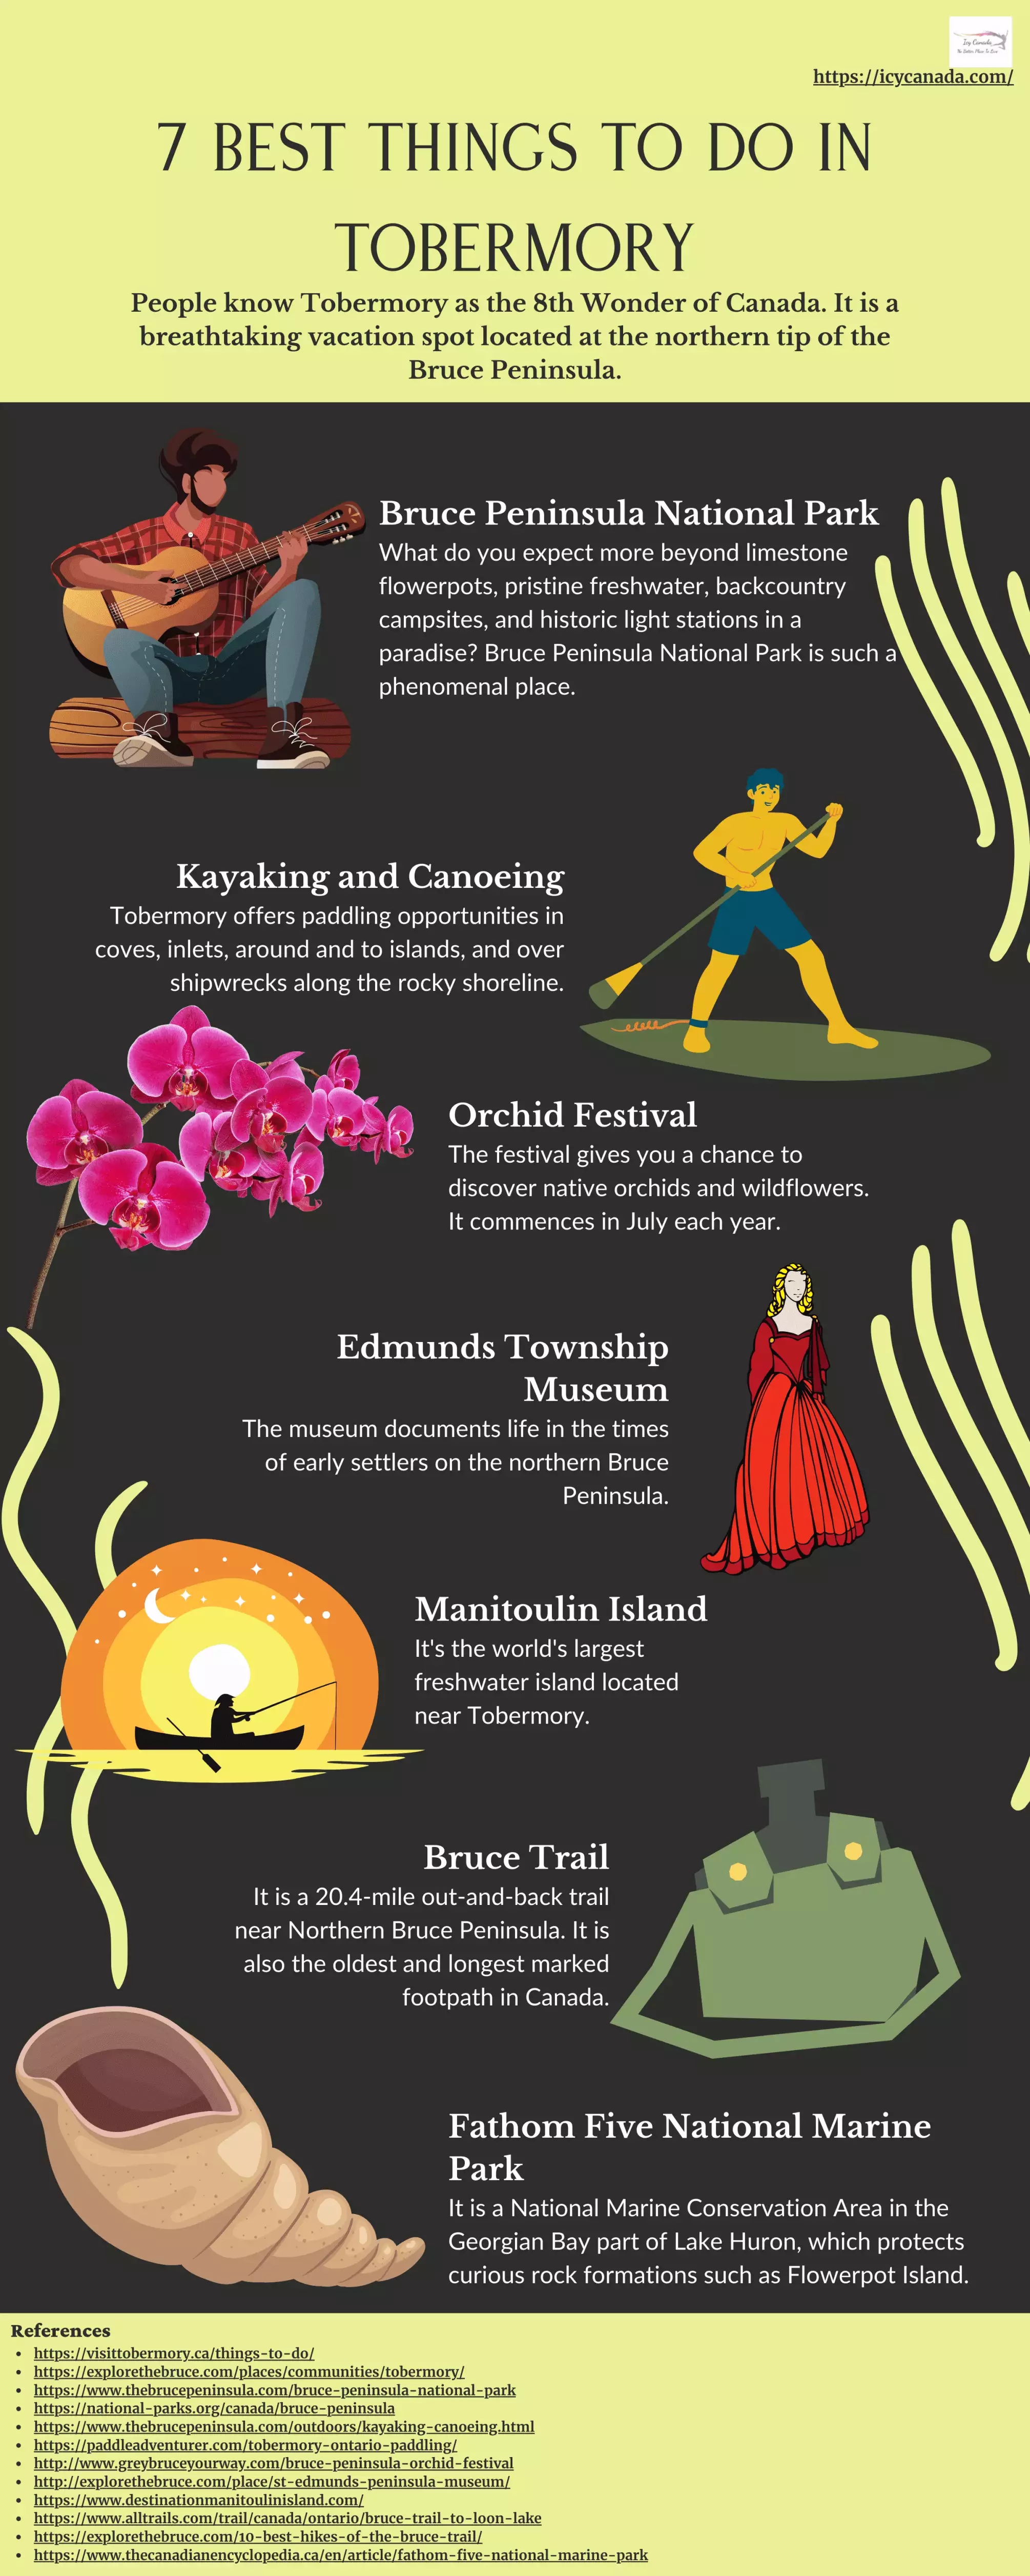 Infographic That Presents 7 Best Things To Do In Tobermory